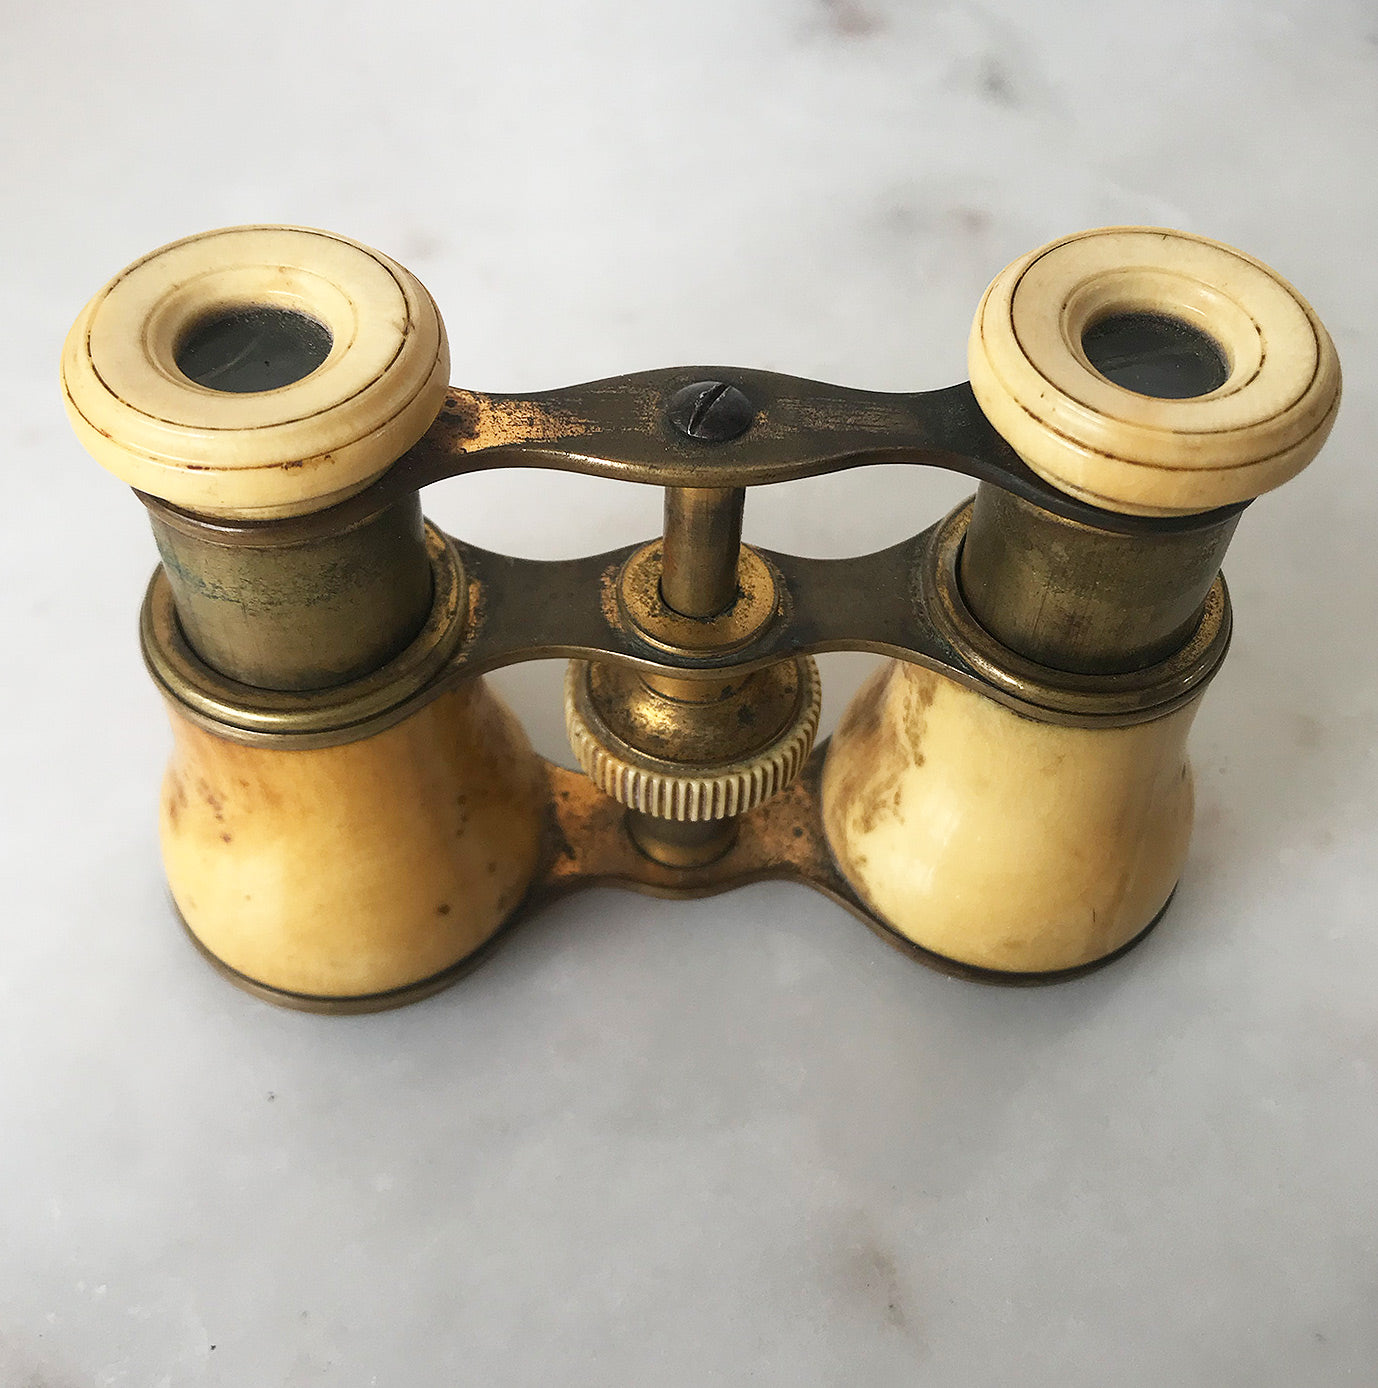 Nice little pair of Vintage Bone and Brass Opera Glasses - SHOP NOW - www.intovintage.co.uk